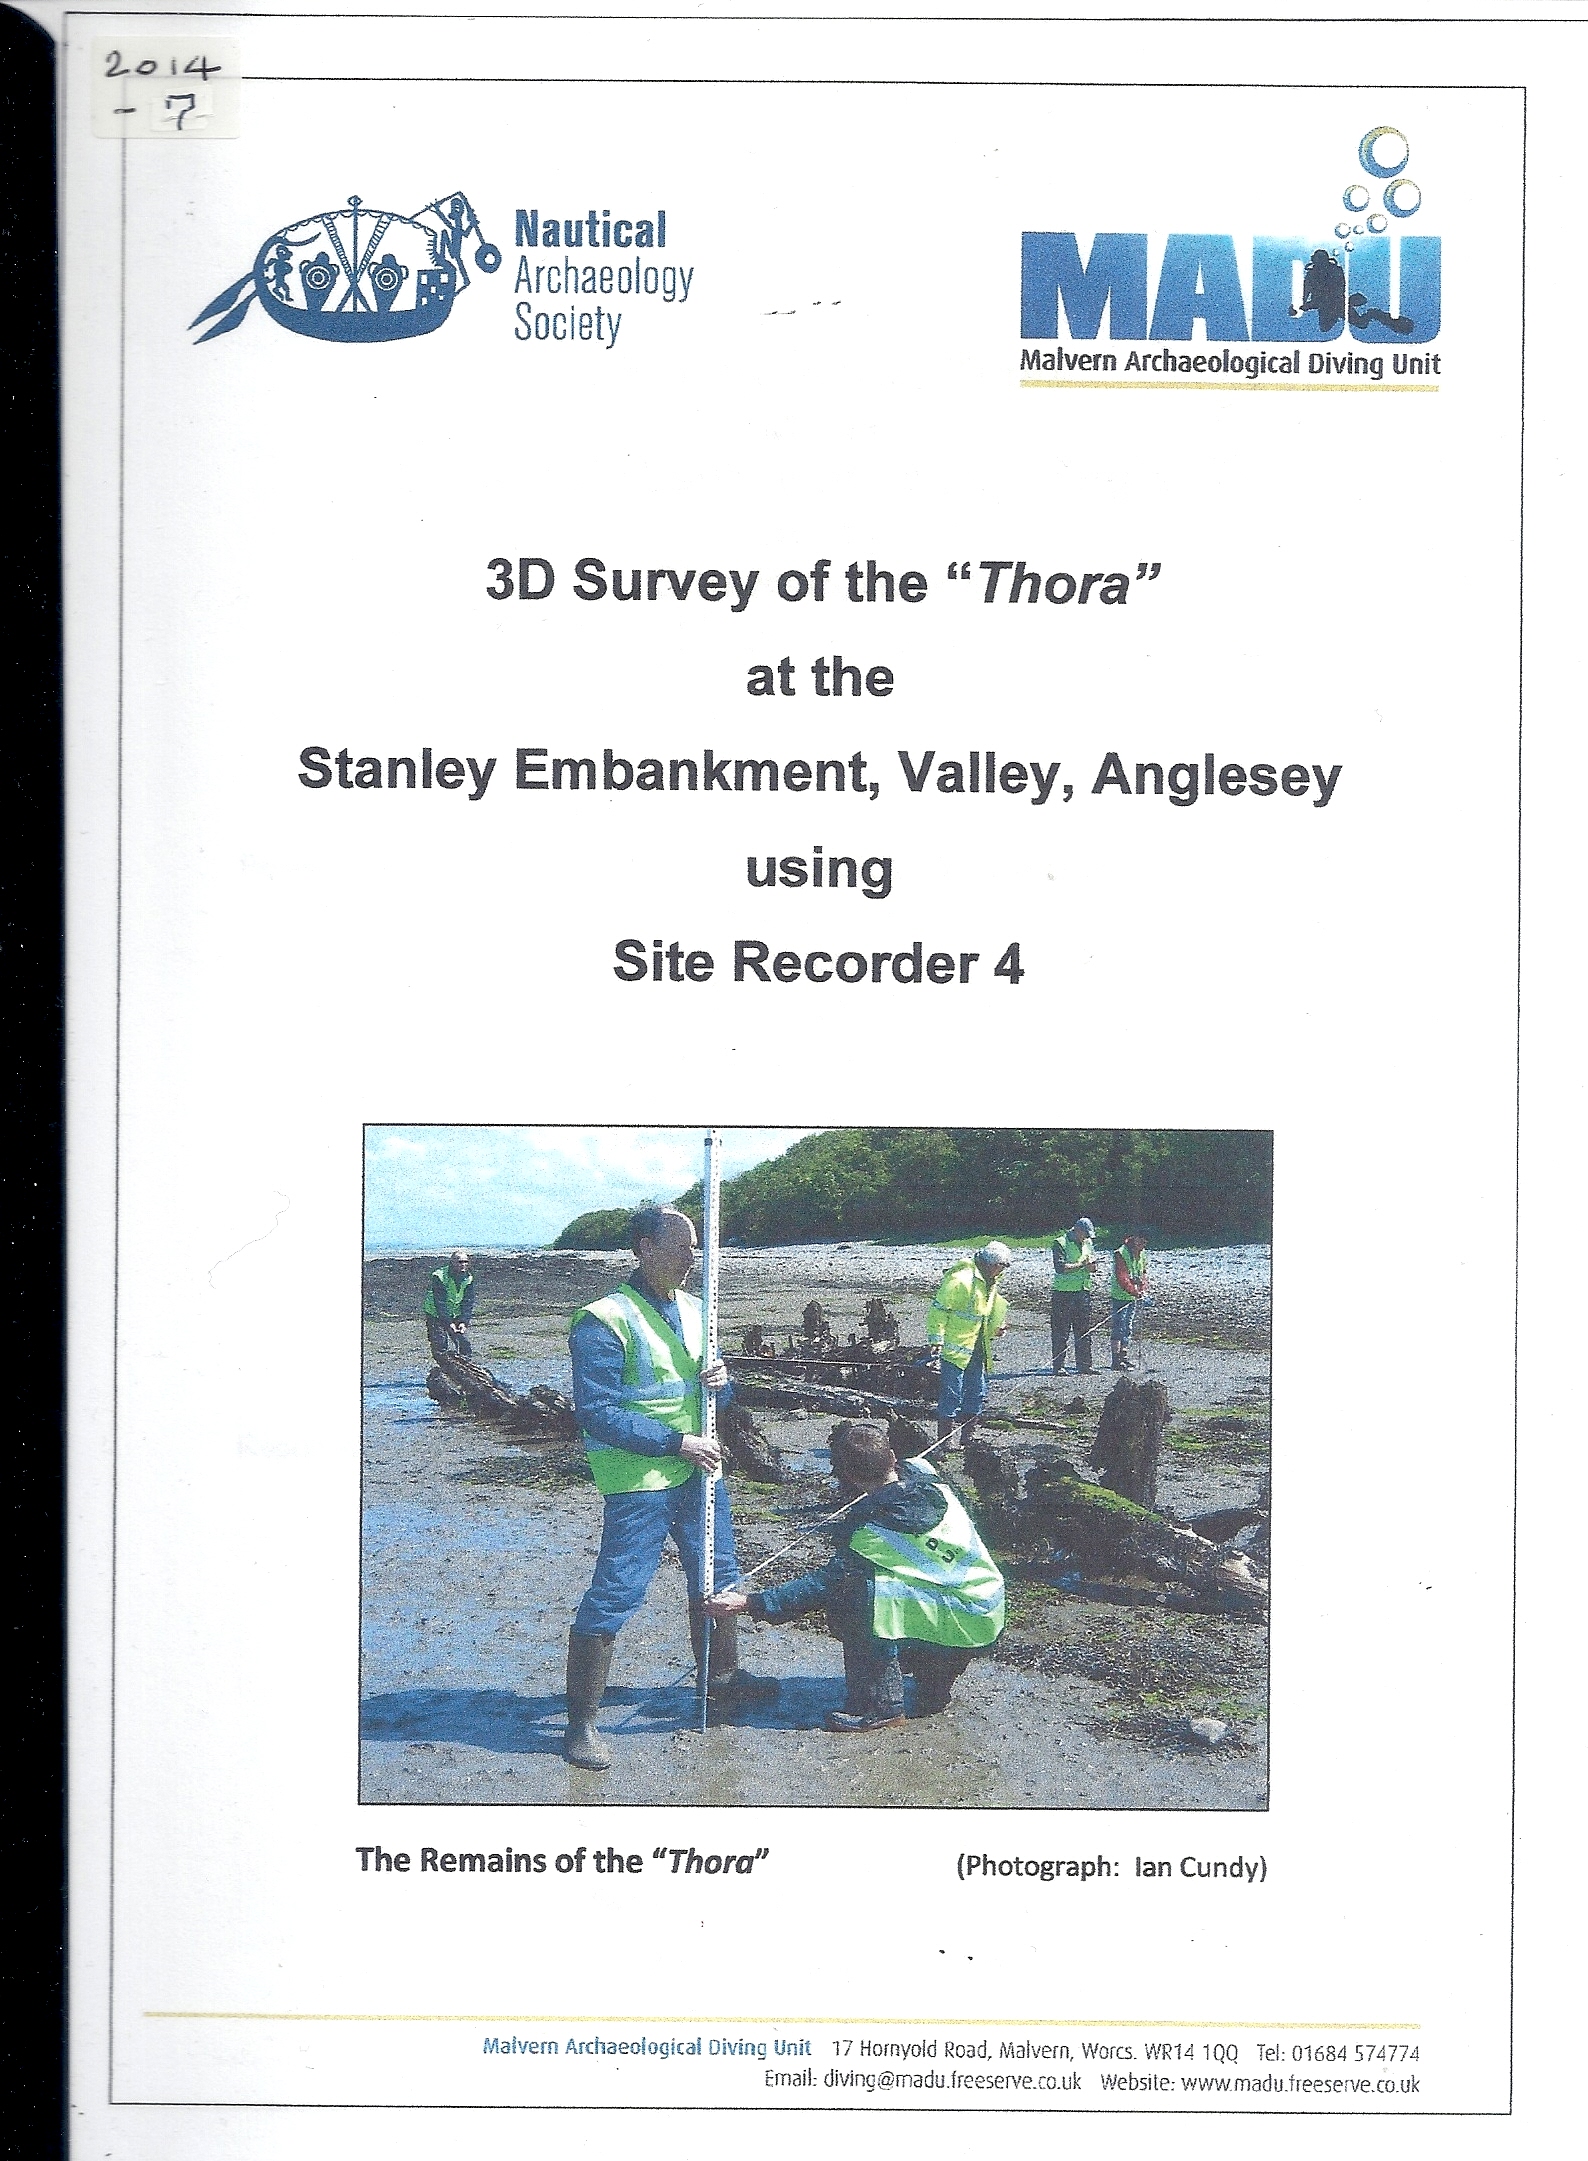 Report on the Thora